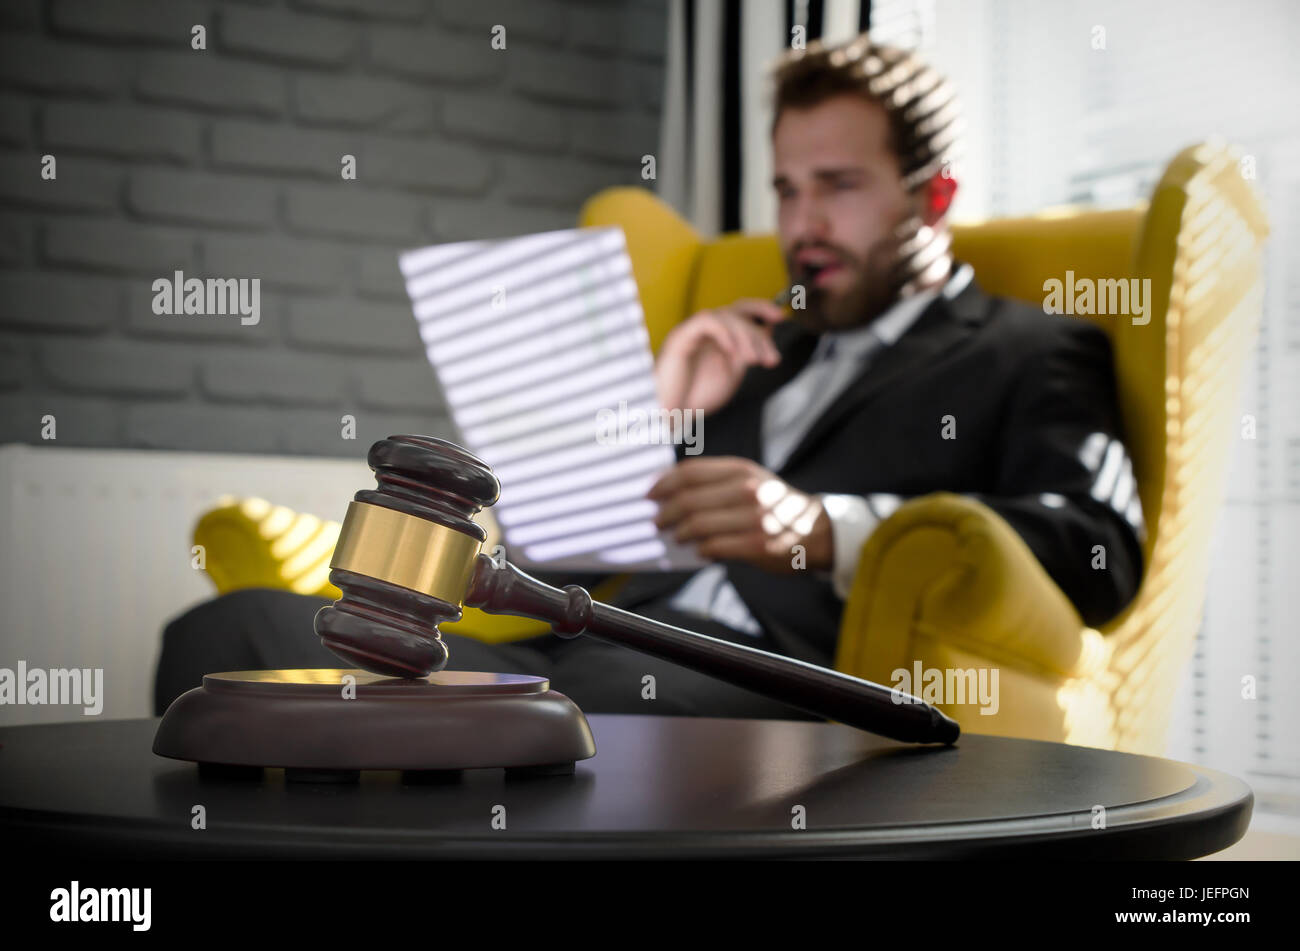 Wooden gavel, working lawyer in background. attorney business judgment justice suite analyzing authority background concept Stock Photo